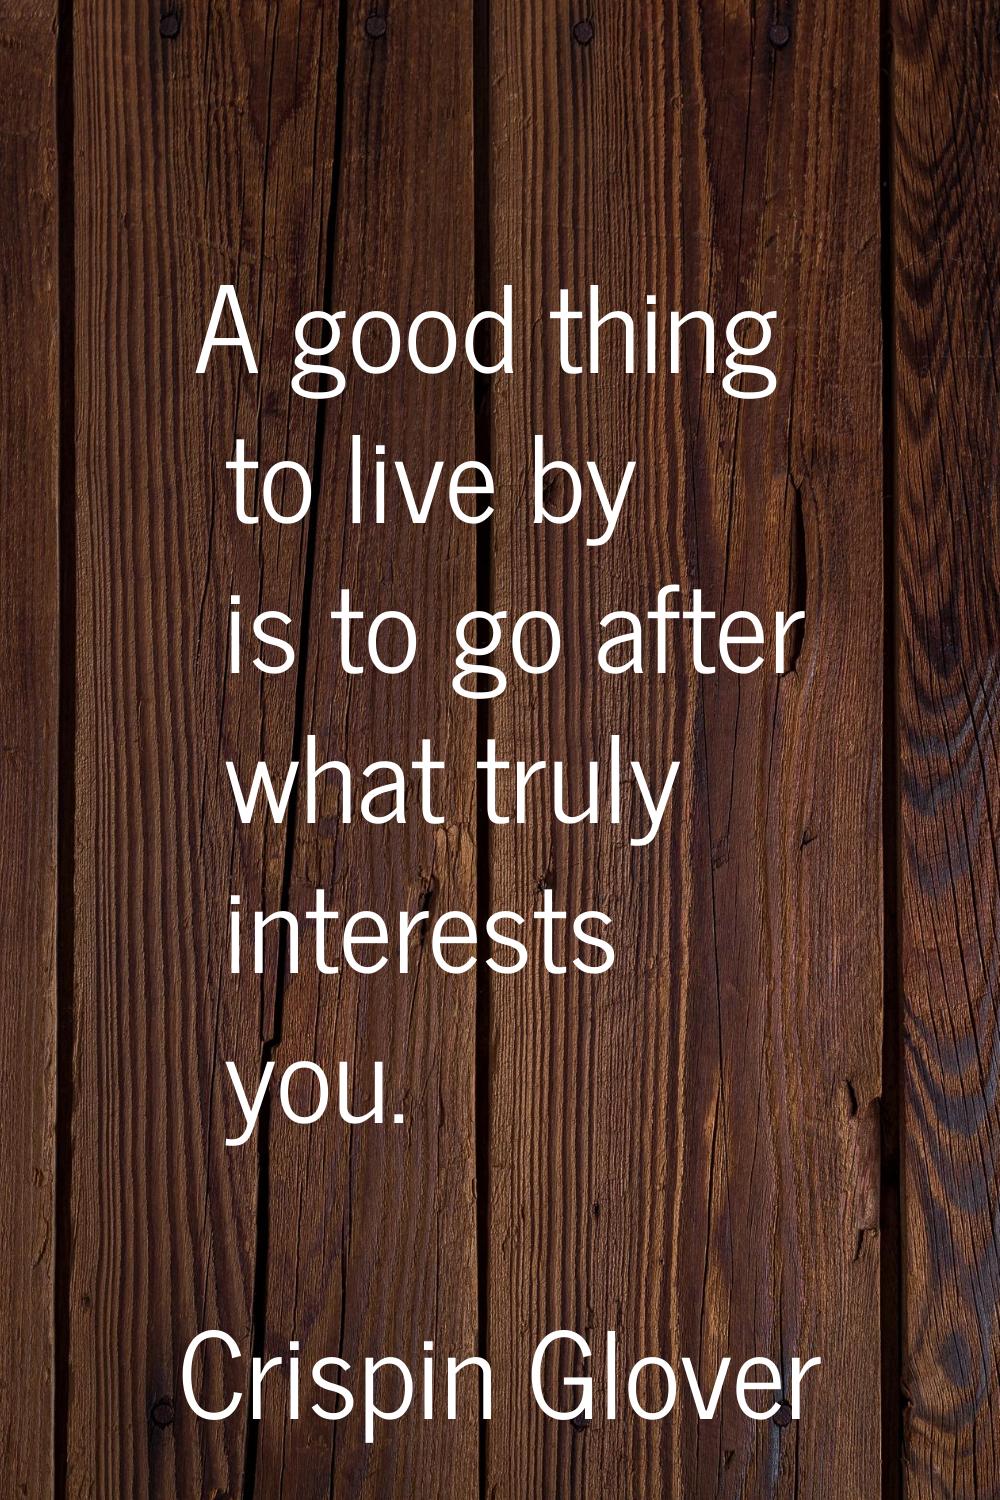 A good thing to live by is to go after what truly interests you.